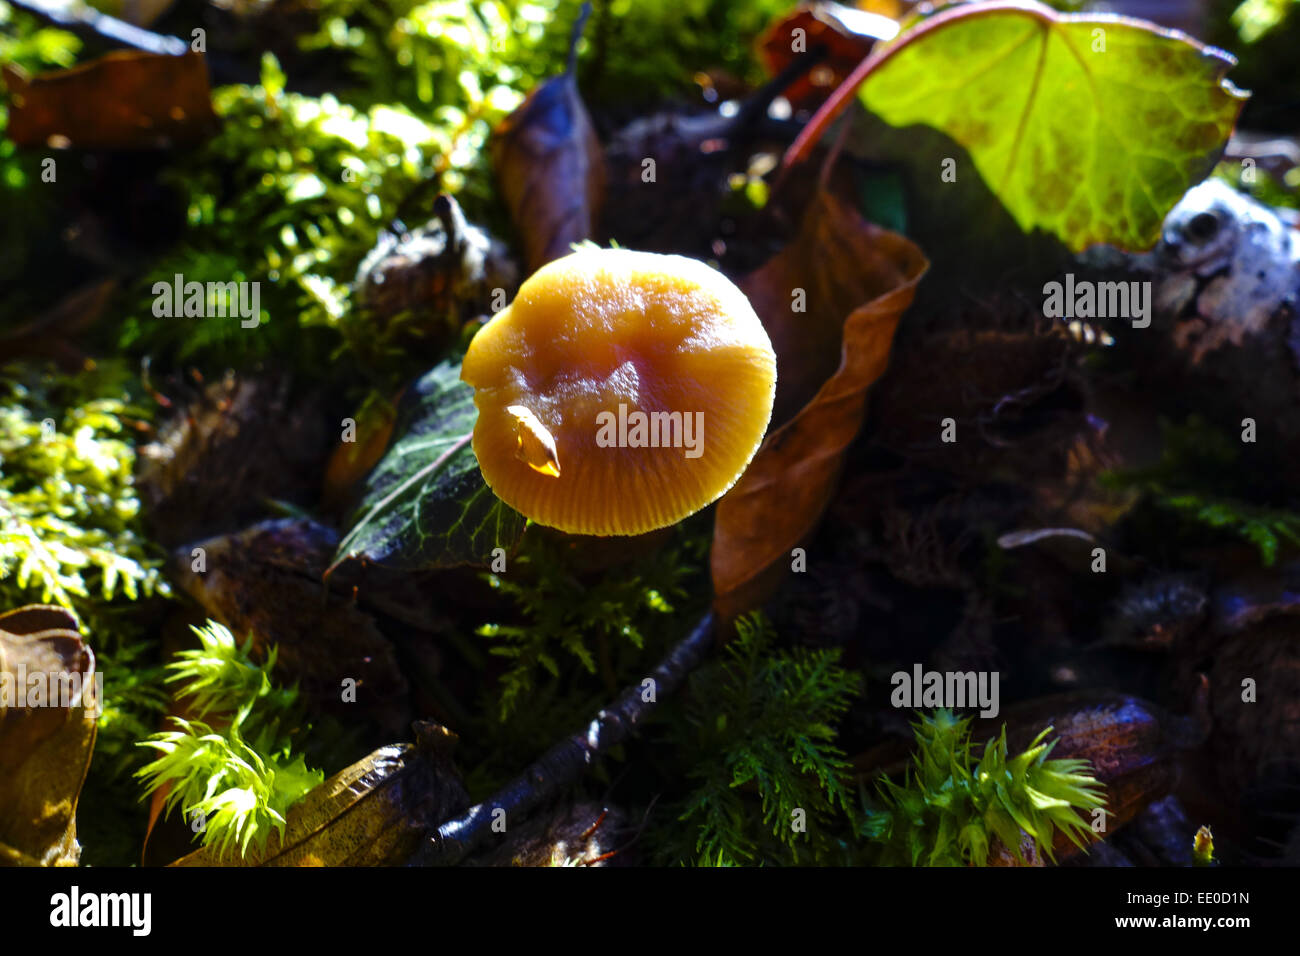 Gelber Pilz im Wald, Nahaufnahme, Yellow mushroom in the forest, close-up, Nature, Forest, Soil, Moss, Leaves, Mushroom, Sunny, Stock Photo